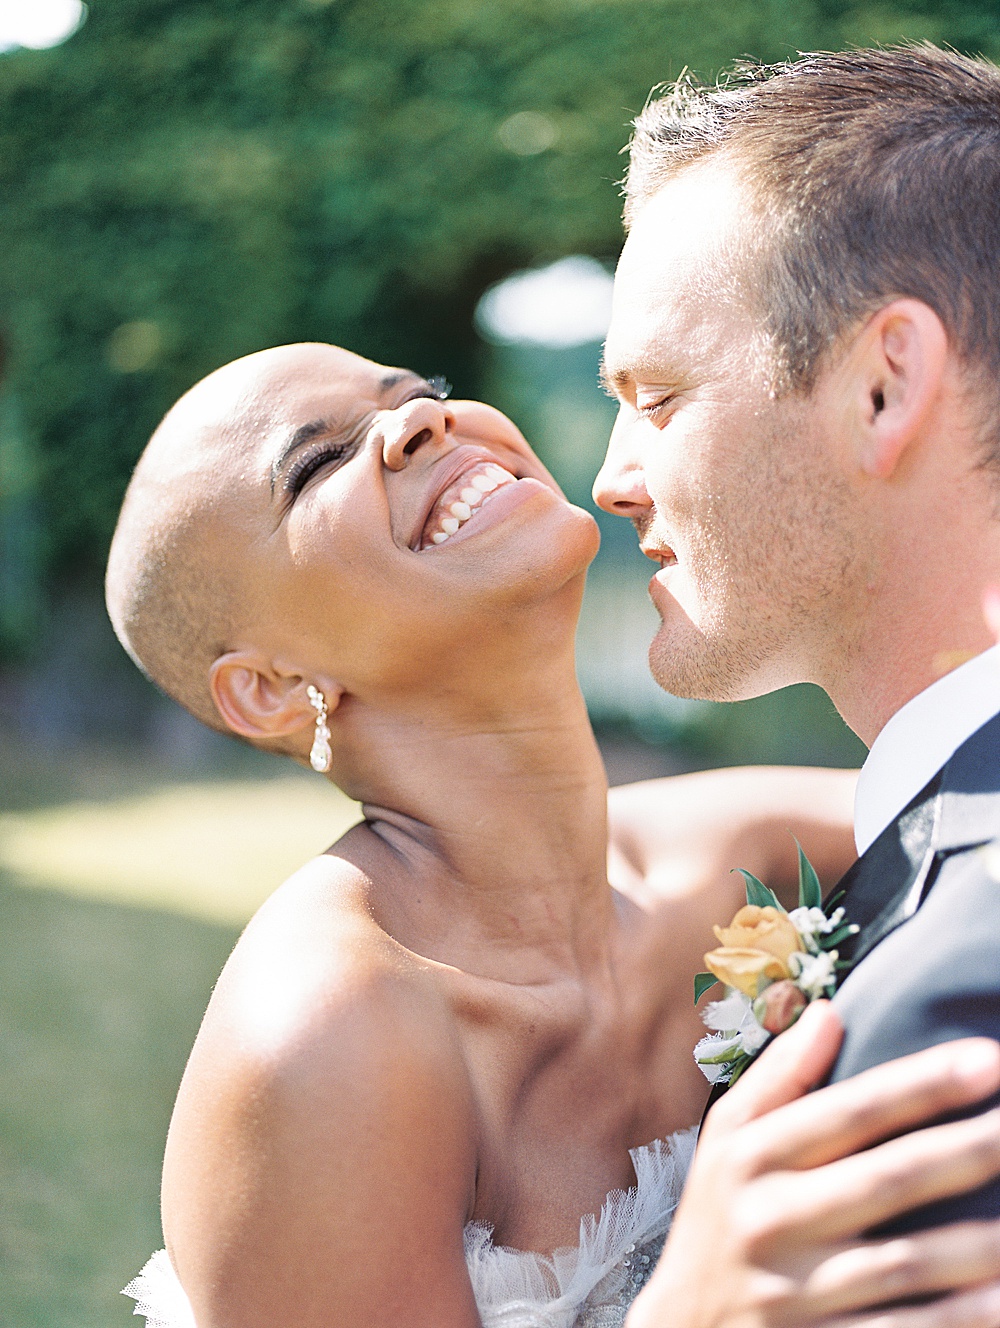 Bald bride laughing with her groom